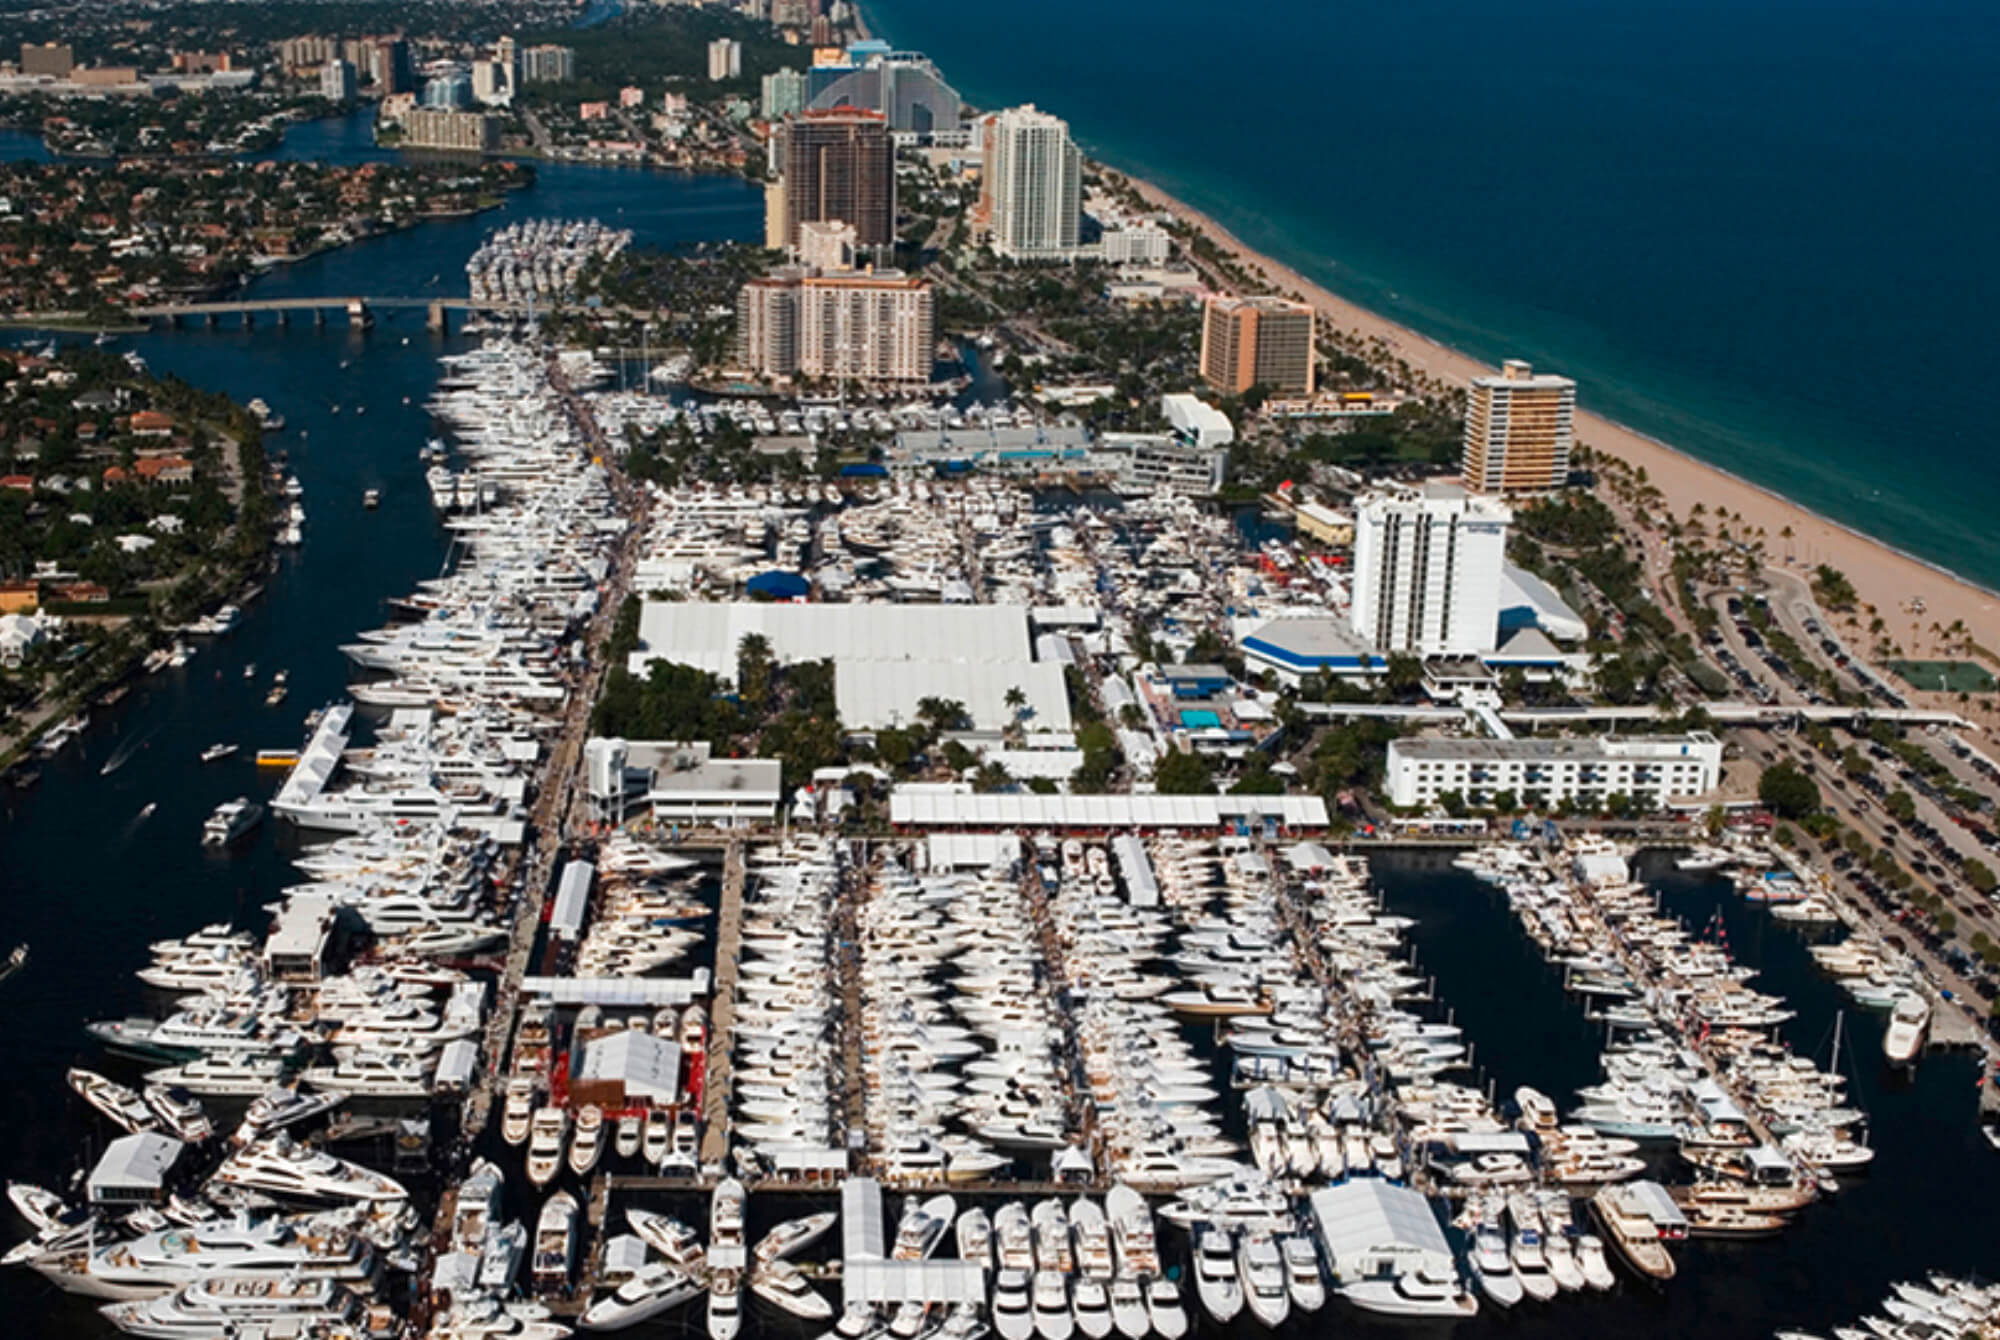 “Made in Germany” at FLIBS